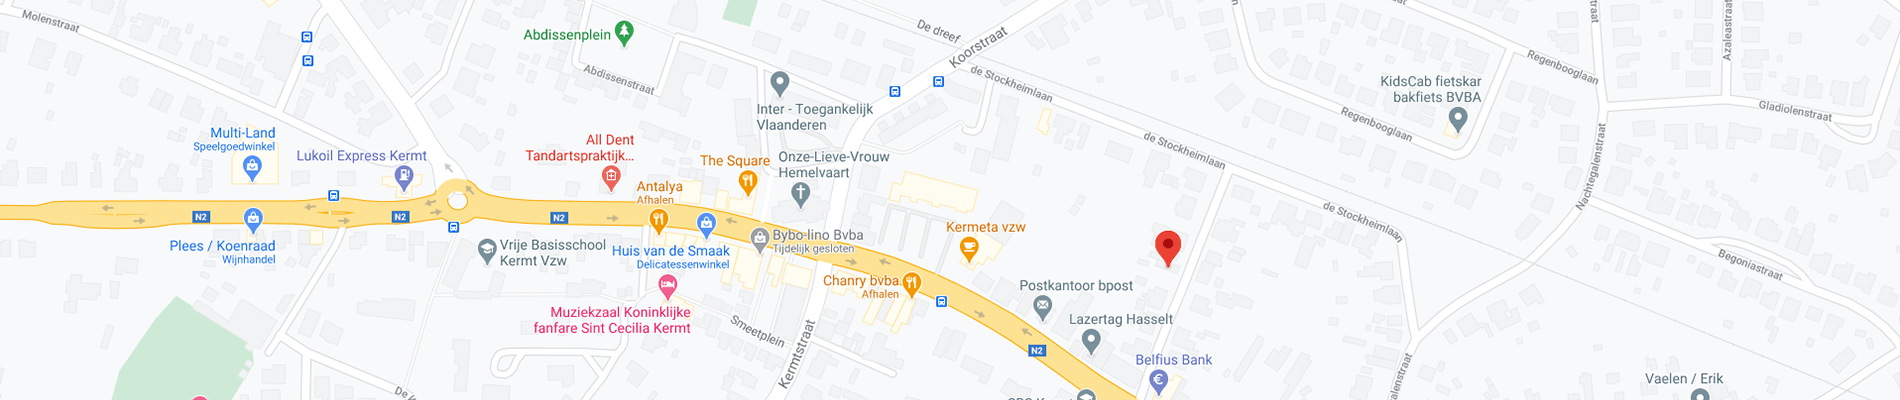 Google Maps Nails and Nails Hasselt